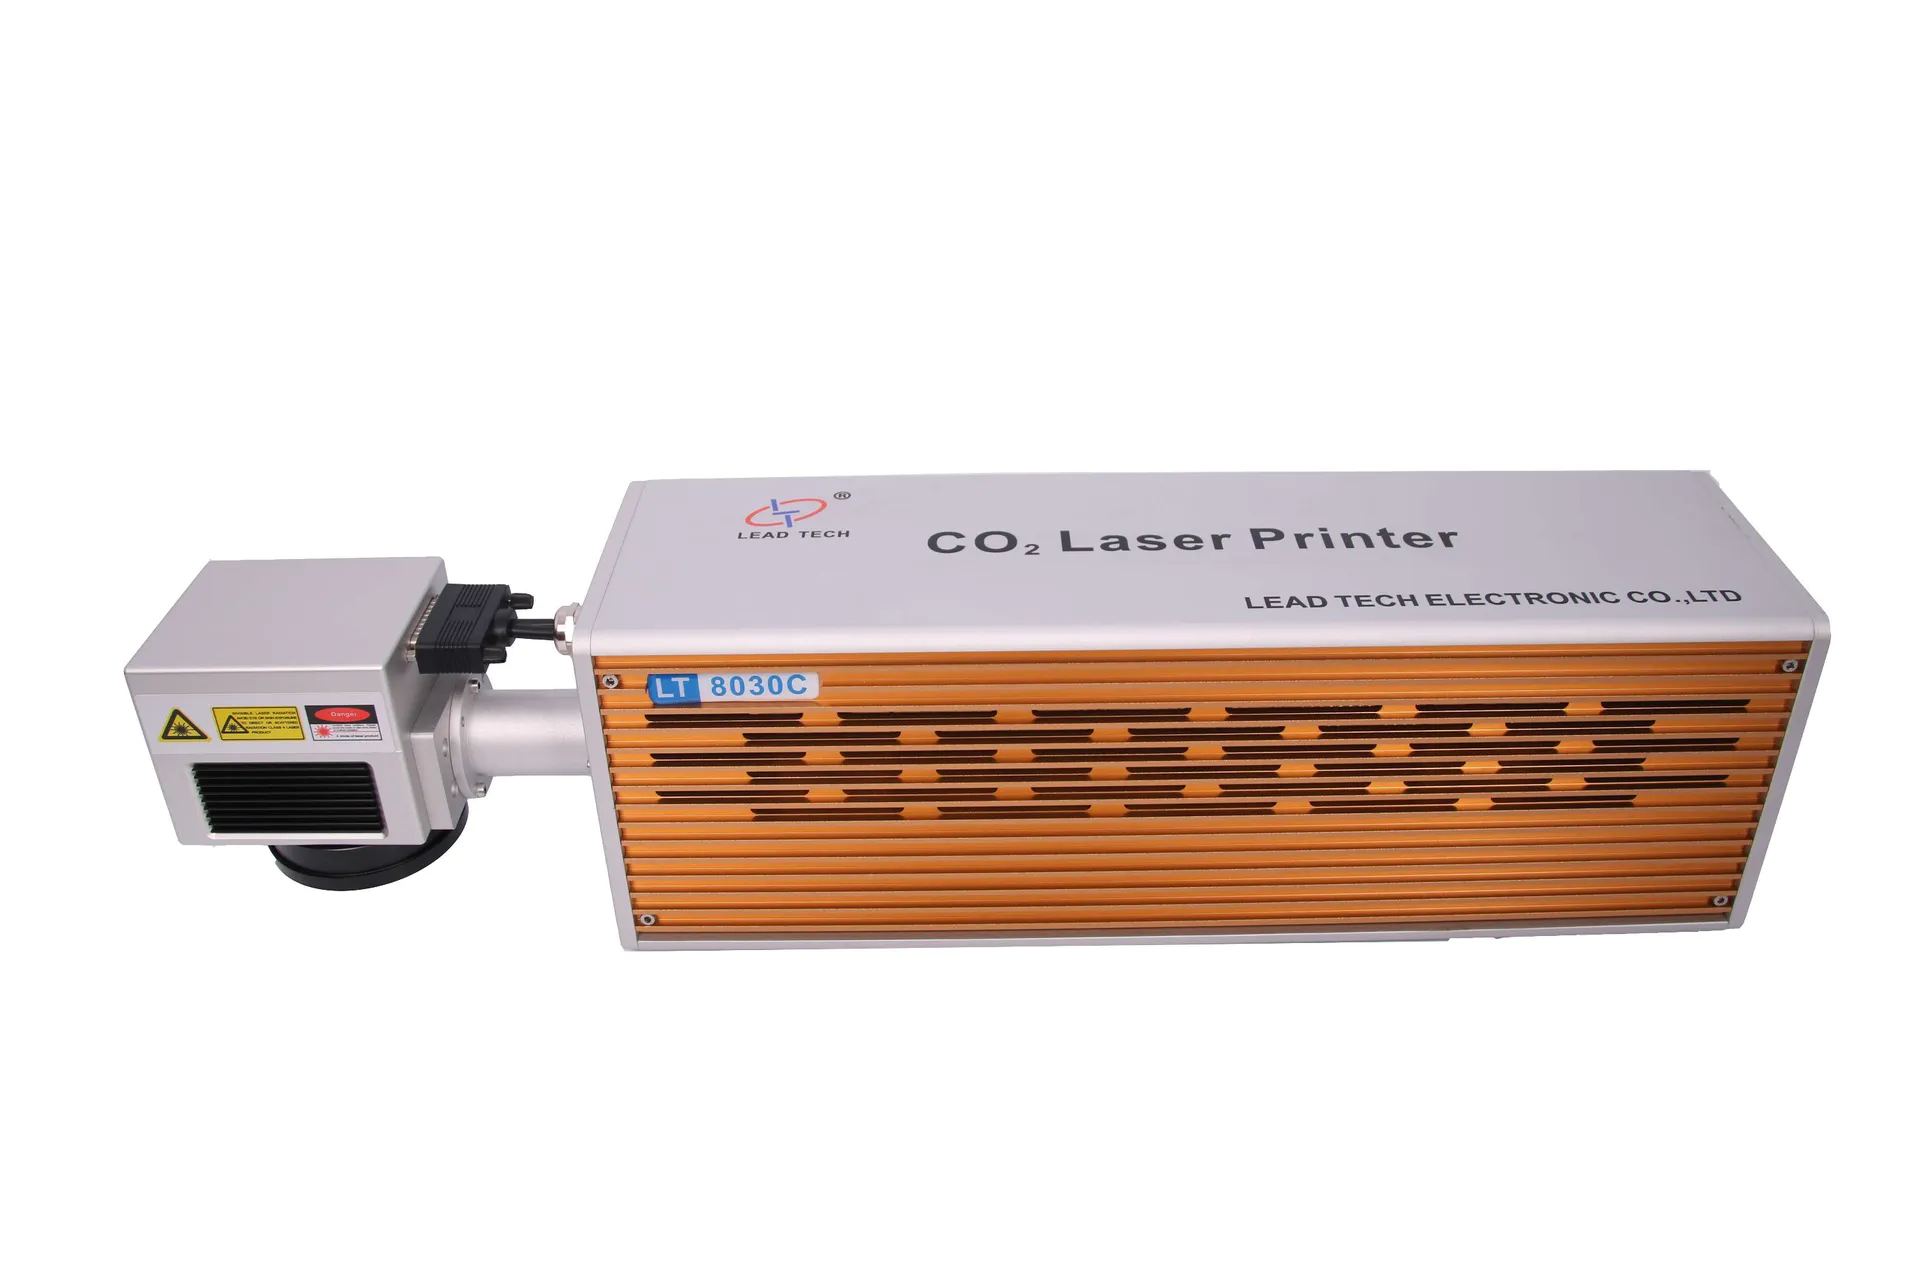 Lt8020c/Lt8030c CO2 High Speed Qr Code Date Character Laser Printer for Cables and Bottle